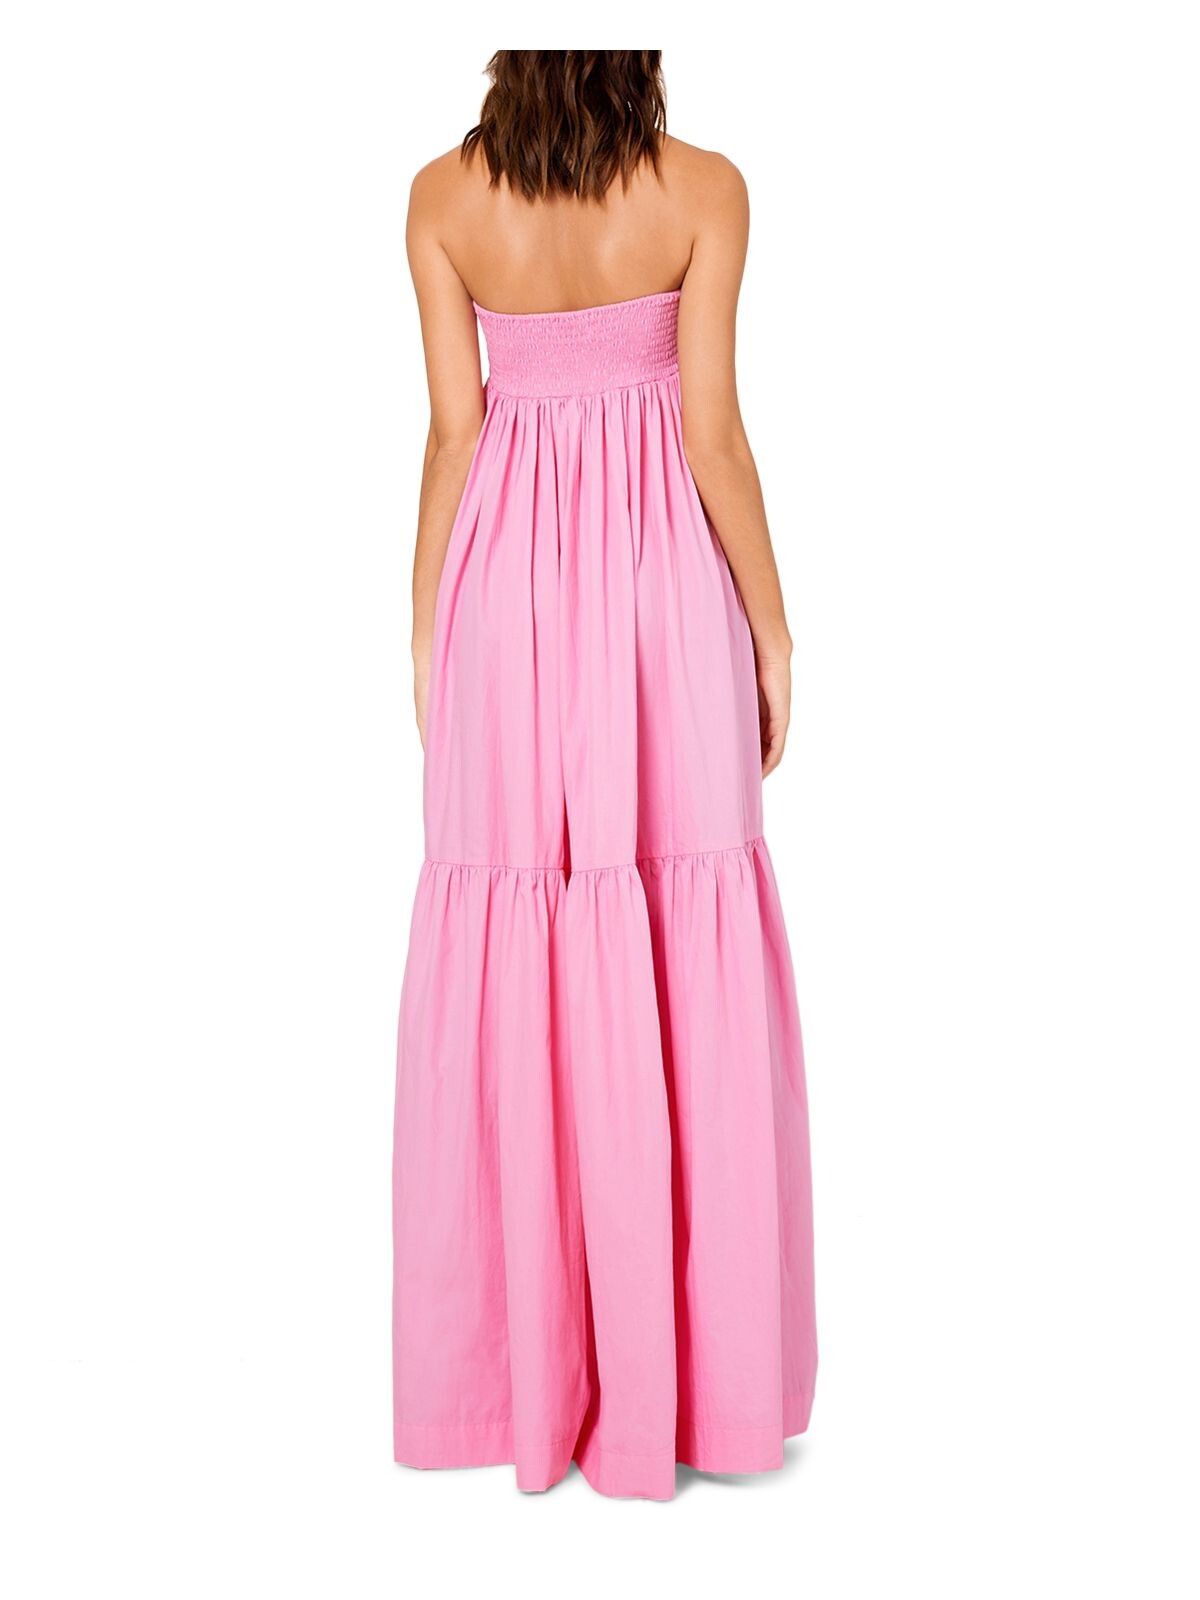 S/W/F Womens Pink Pocketed Smocked Tiered Pleated Tie Back Unlined Spaghetti Strap Sweetheart Neckline Full-Length Gown Dress S